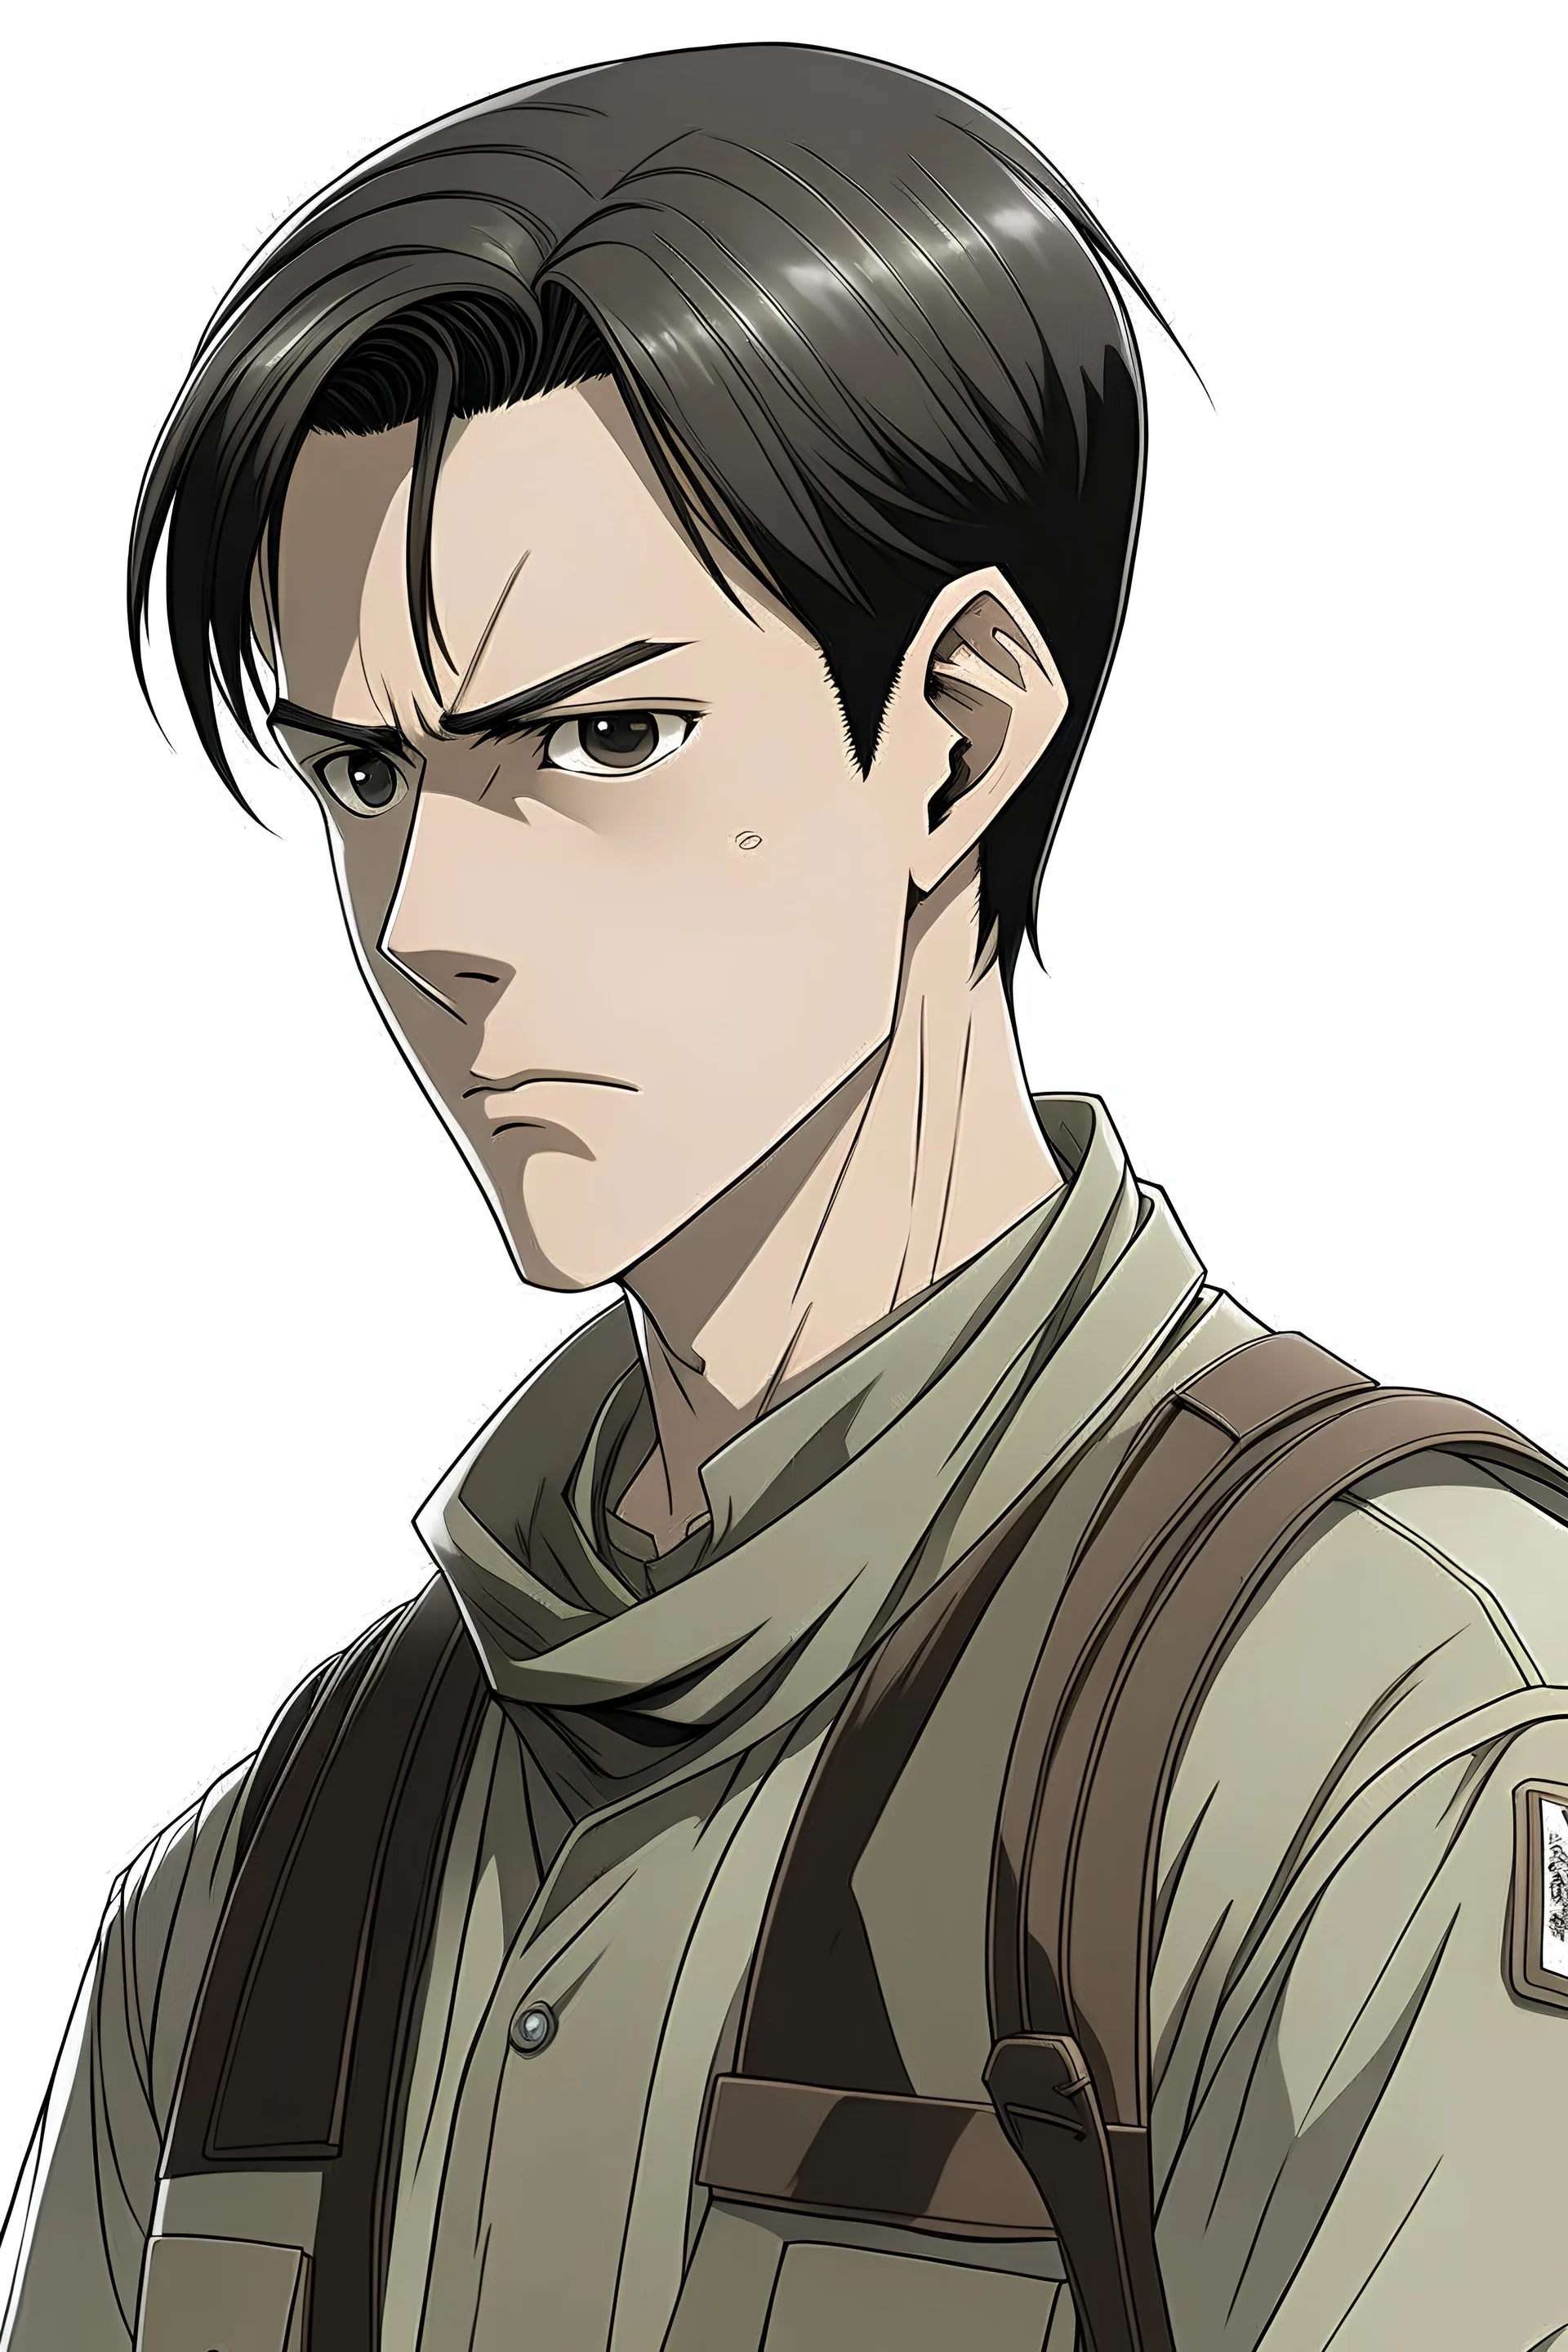 levi ackerman Levi has short, straight black hair styled in an undercut curtain, as well as narrow, intimidating dull gray eyes with dark circles under them and a deceptively youthful face. He is quite short, but his physique is well-developed in musculature from extensive vertical maneuvering equipment usage.